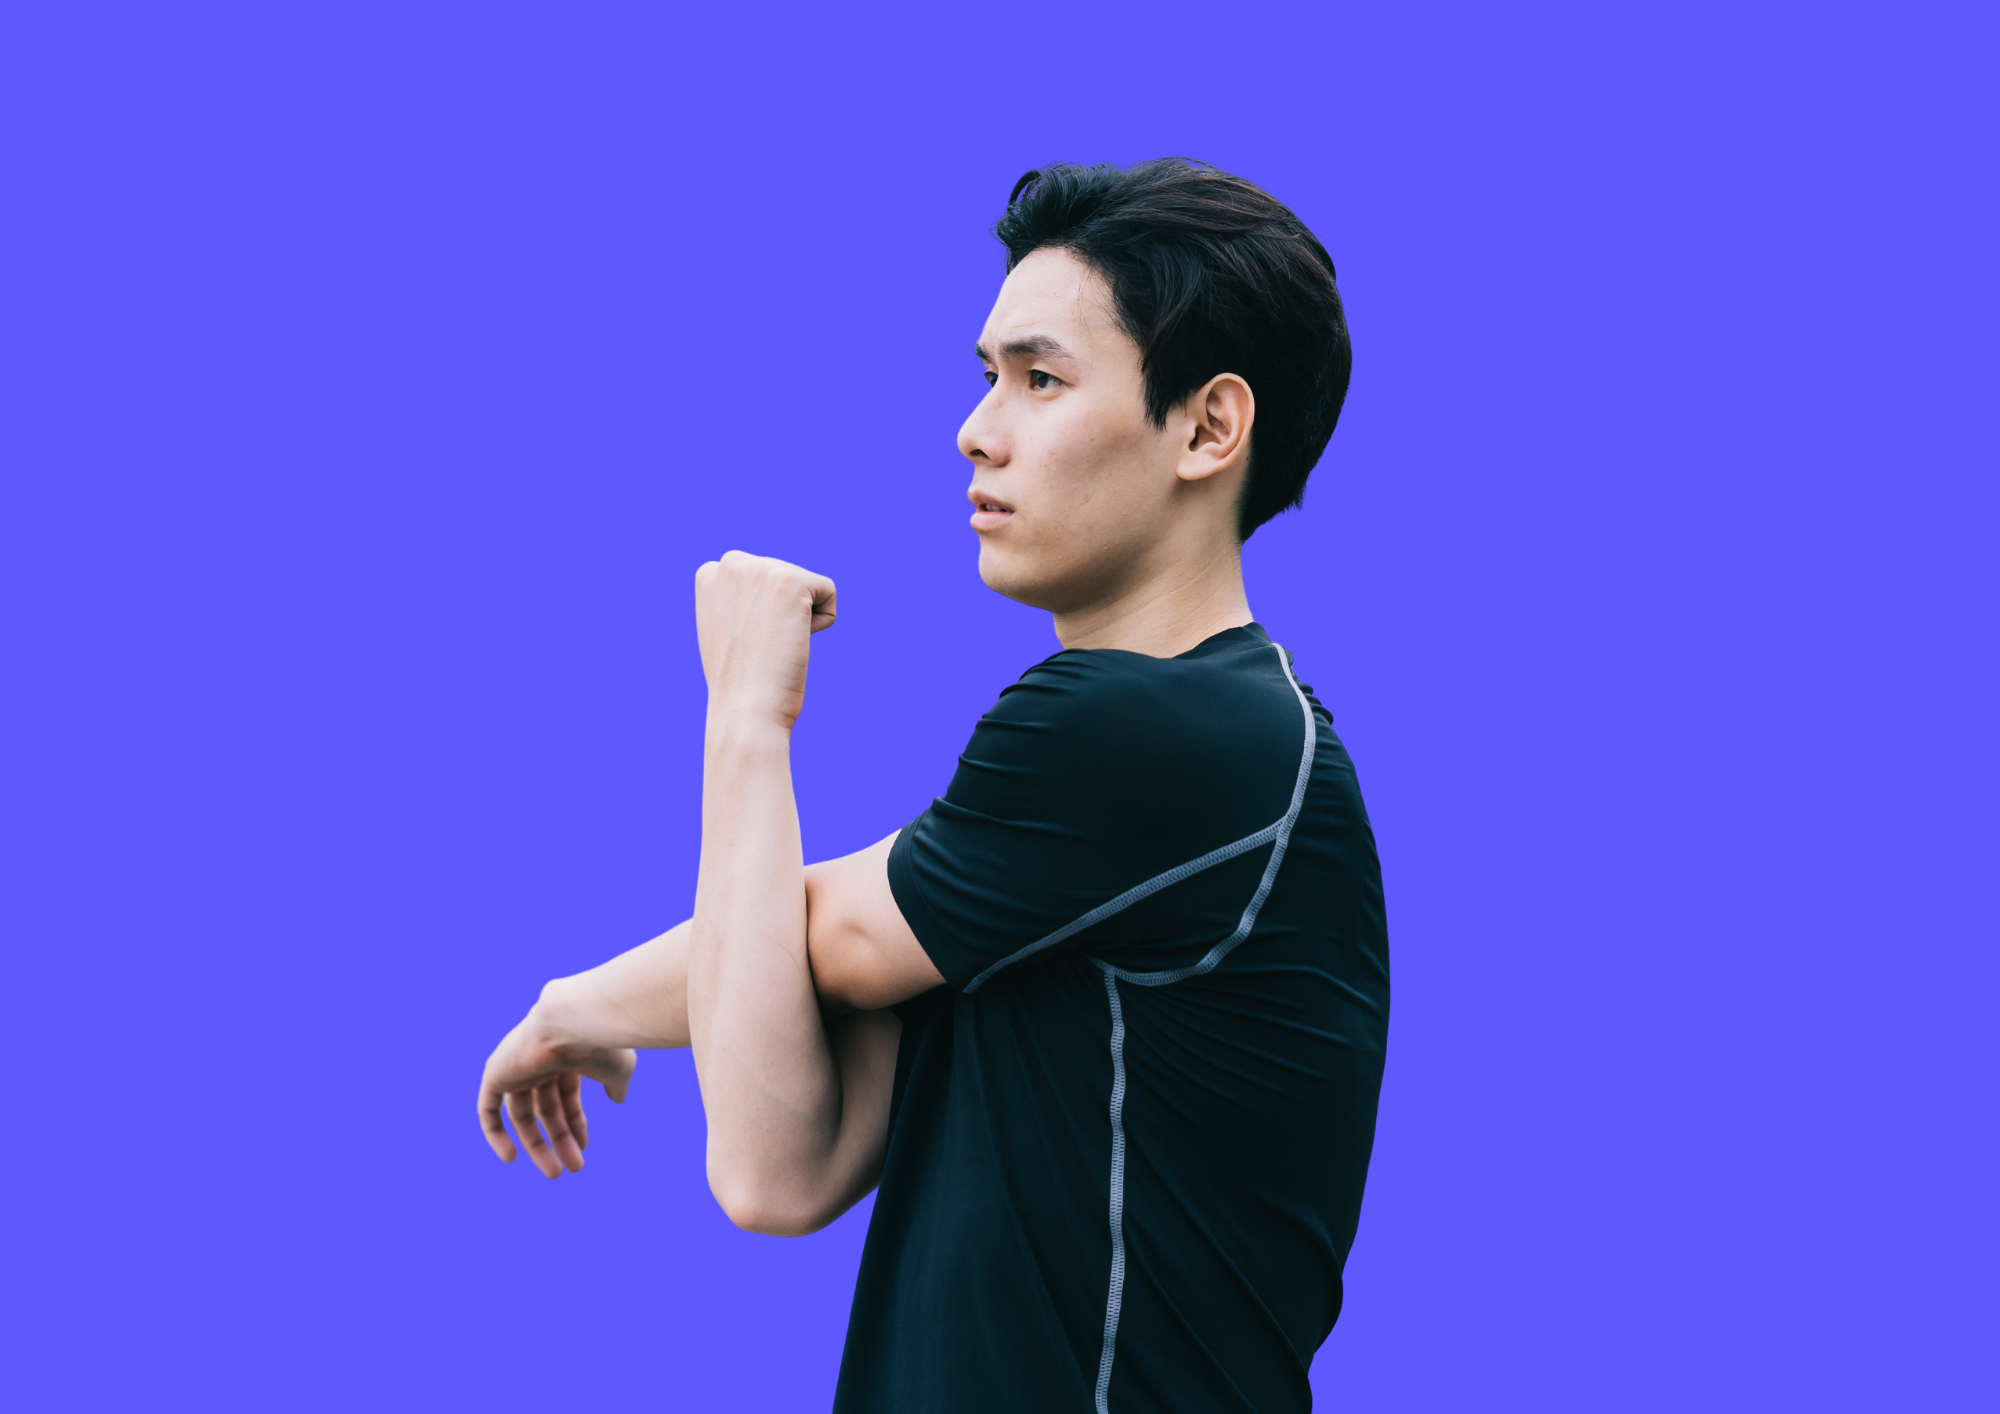 Young man is stretching his arm and shoulder. Blue background.